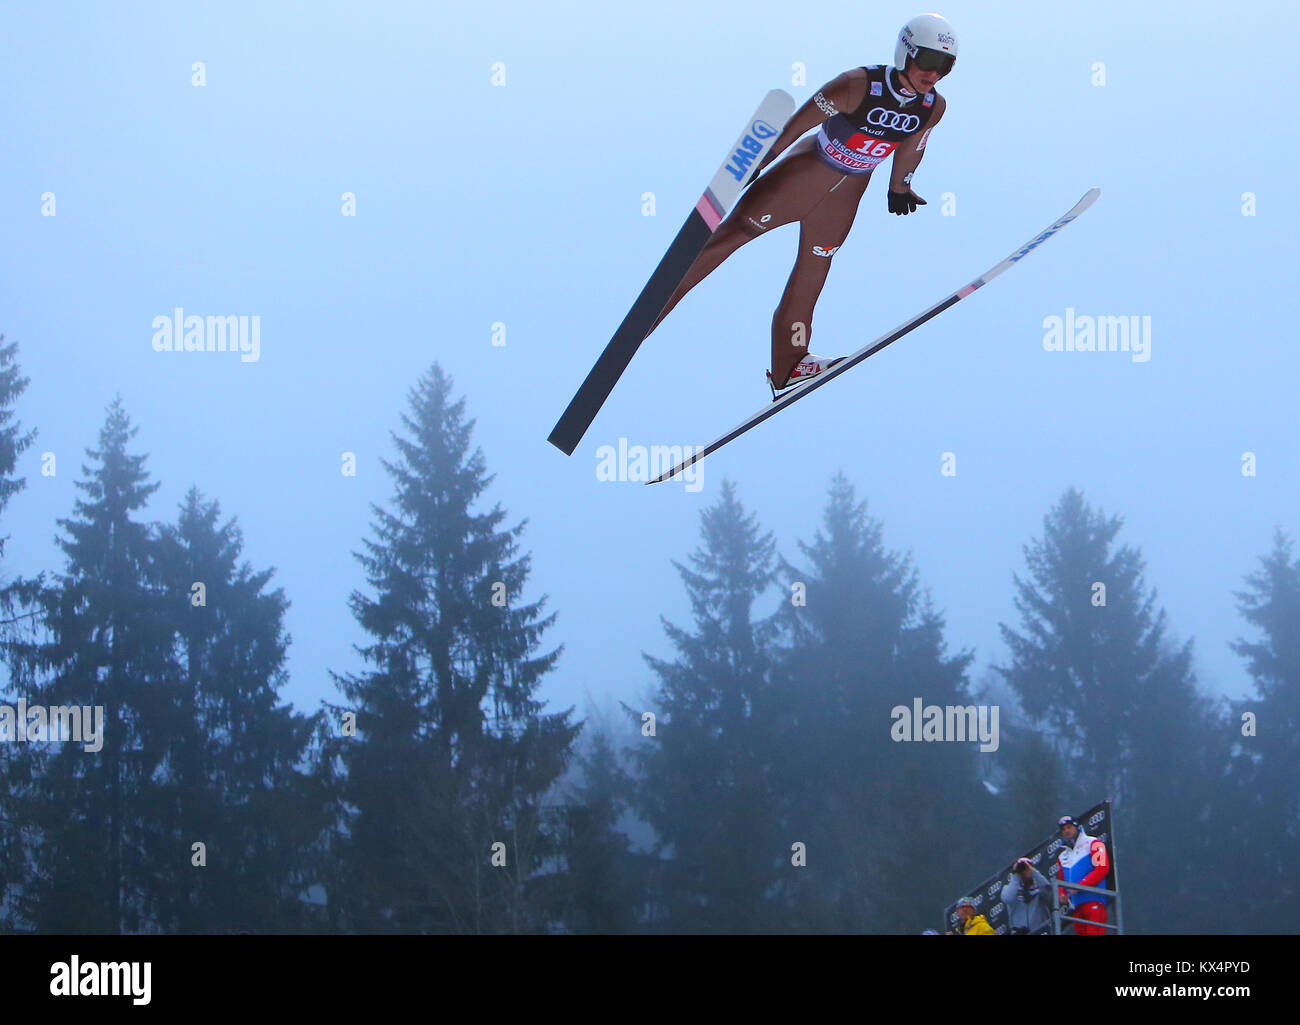 Bischofshofen, Austria. 06th, Jan, 2018. Zyla Piotr from Poland competes at the trial round on day 8 of the 66th Four Hills Ski jumping tournament in Bischofshofen, Austria, 06 January 2018. (PHOTO) Alejandro Sala/Alamy Live News Stock Photo